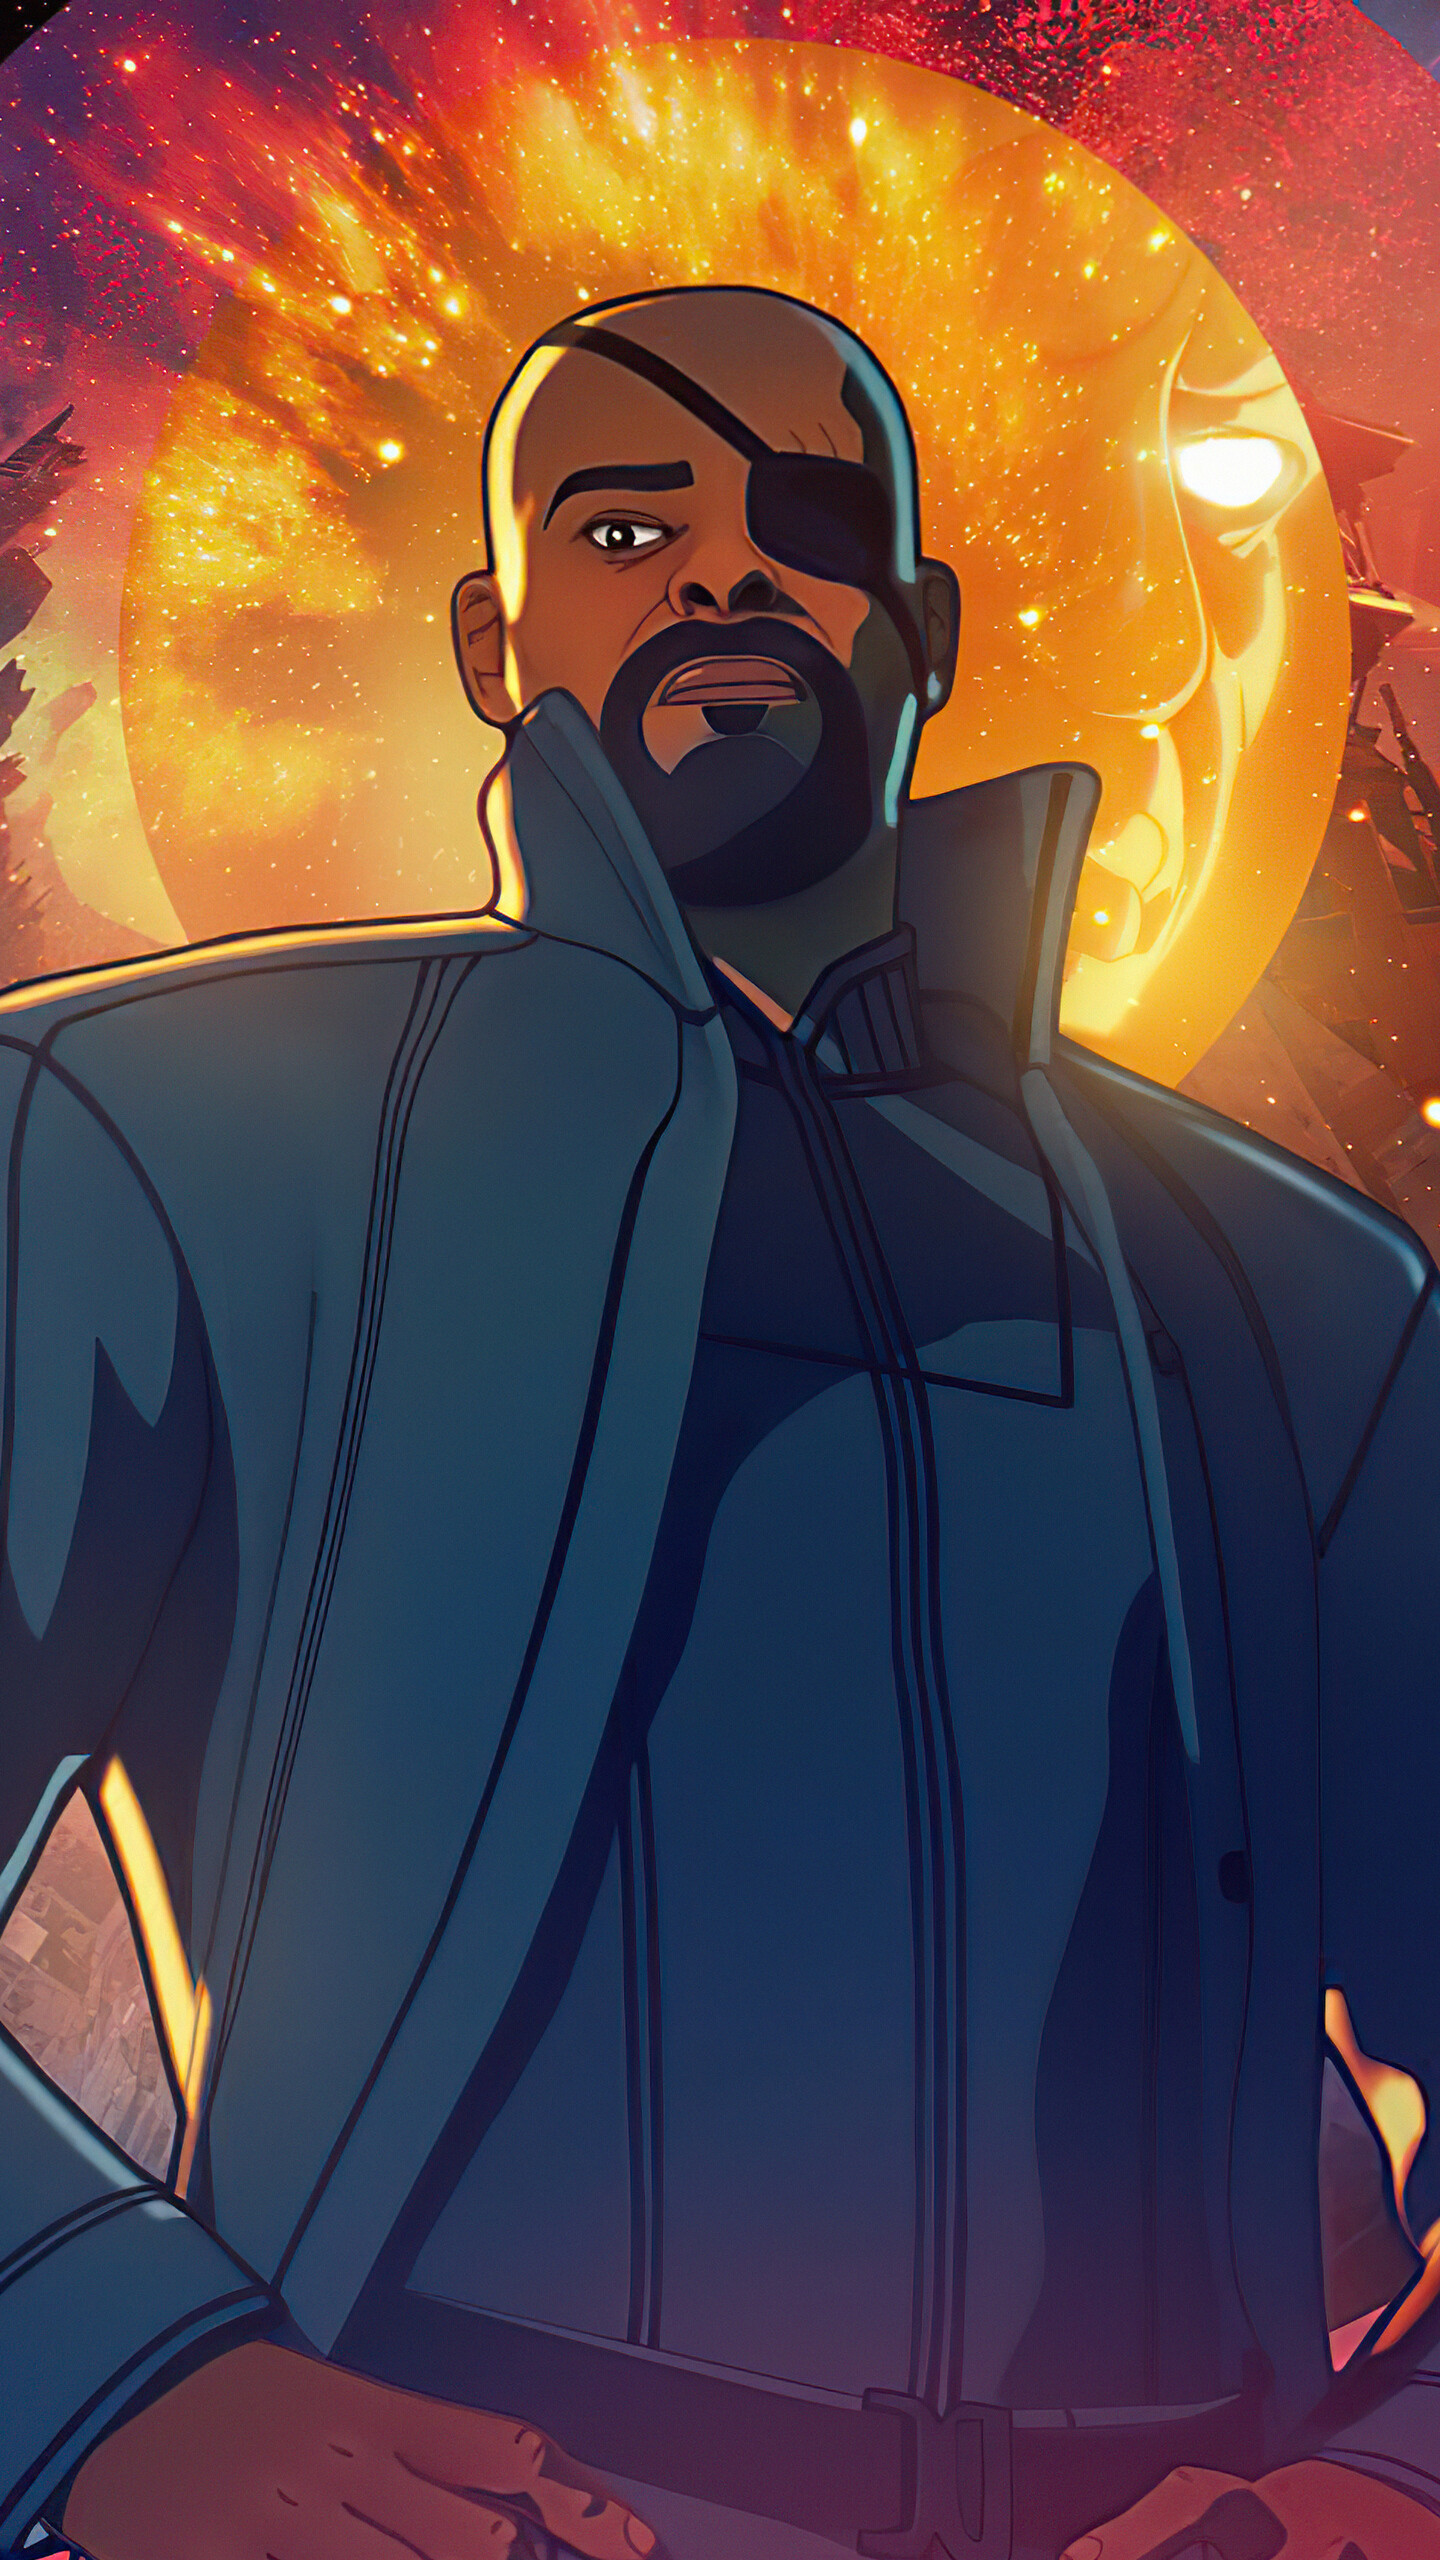 What If...?: Nick Fury, the Director of S.H.I.E.L.D. and the man behind the Avengers Initiative. 1440x2560 HD Background.